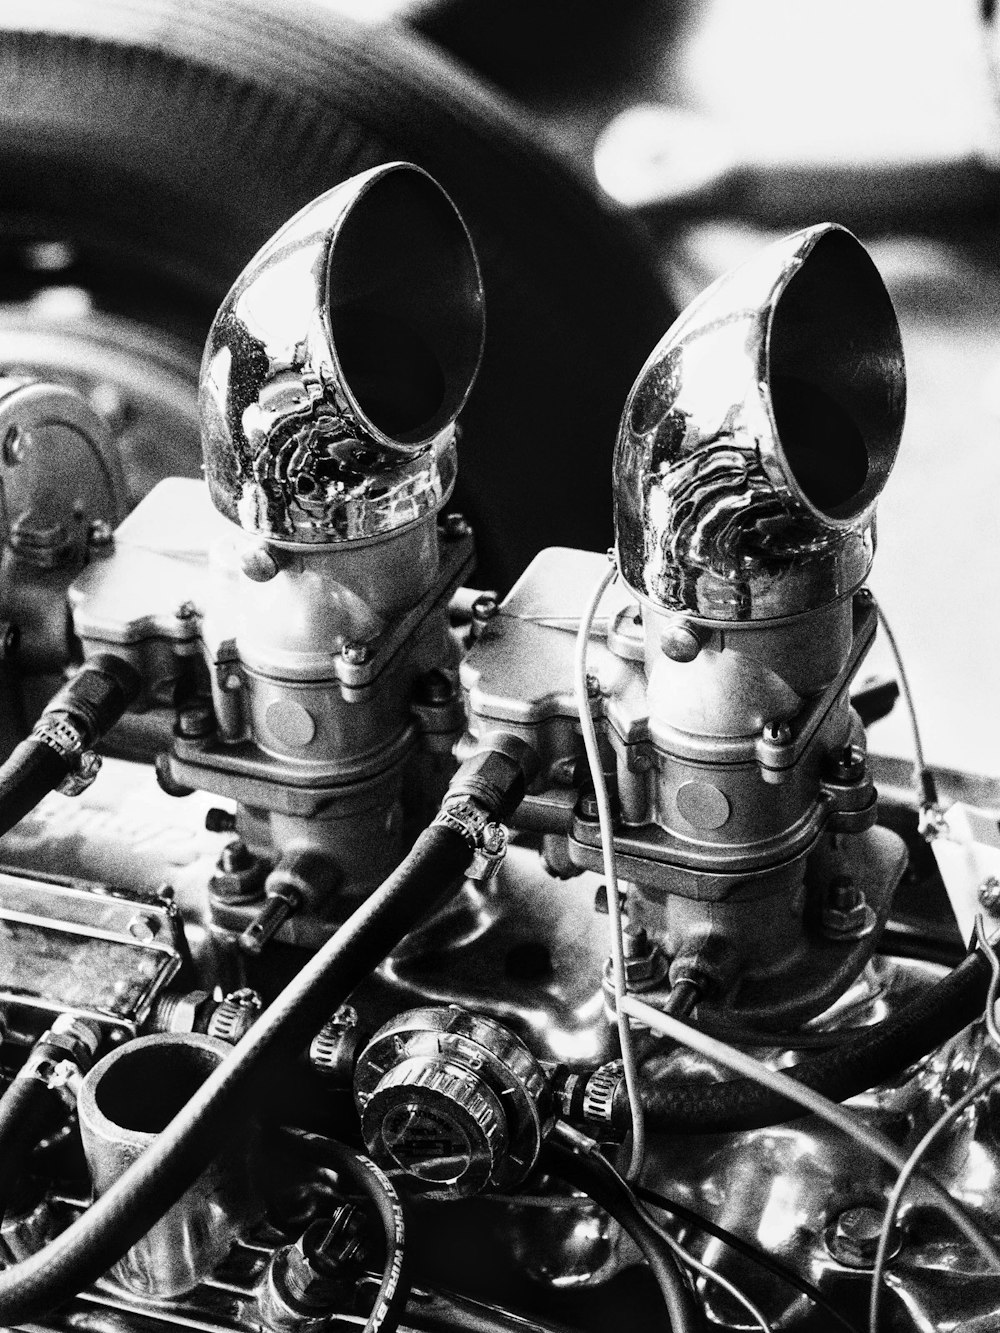 a black and white photo of a car engine